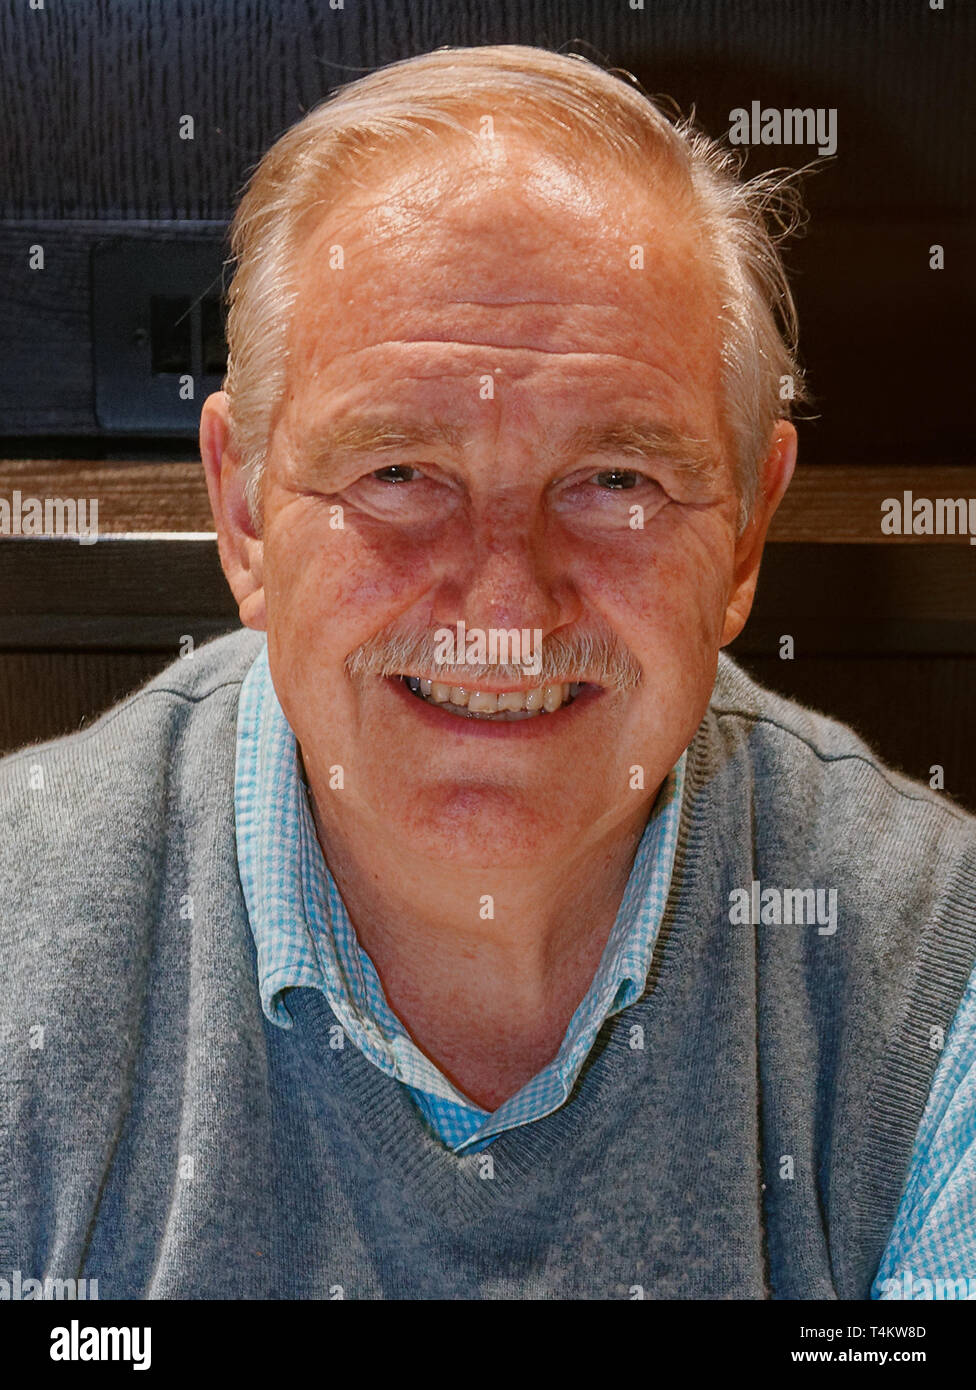 London, United Kingdom - 26 February 2019 DrugScience founder chair, Professor David Nutt, at the screening of film, Magic Medicine at the Regent Street Cinema, Marylebone, London, England, UK. The film follows volunteers receiving experimental treatment with psilocybin, the active ingredient in magic mushrooms, to see if it can help treat long-term depression. DrugScience is a charity researching the medical uses of psychoactive drugs. The film was followed by a Q&A with Professor David Nutt founding chair of DrugScience and Head of the Neuropsychopharmacology Unit in the Centre for Academic  Stock Photo